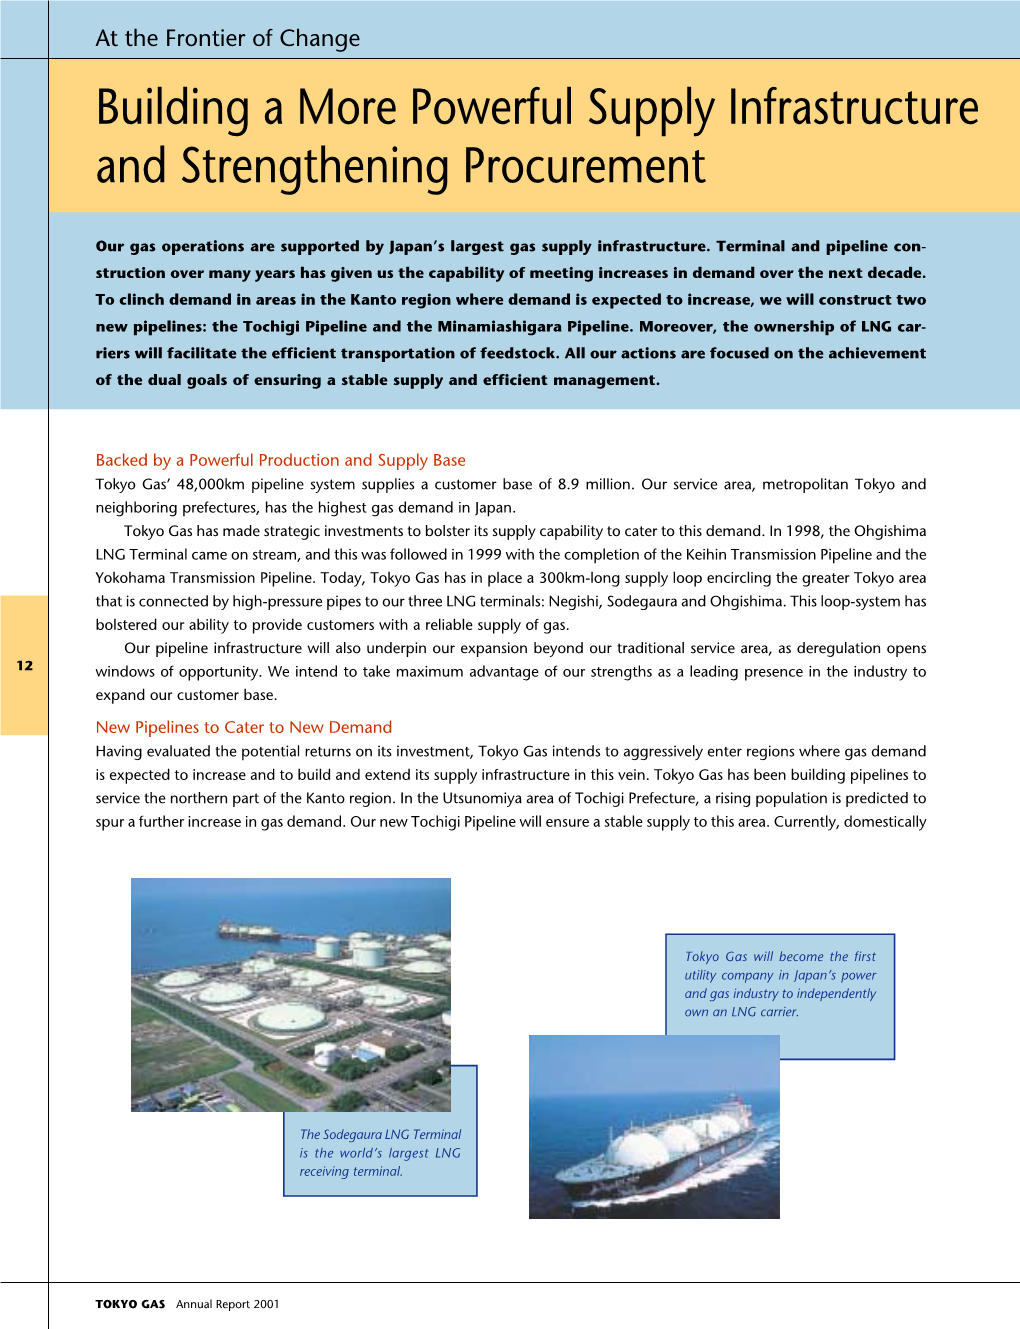 Building a More Powerful Supply Infrastructure and Strengthening Procurement